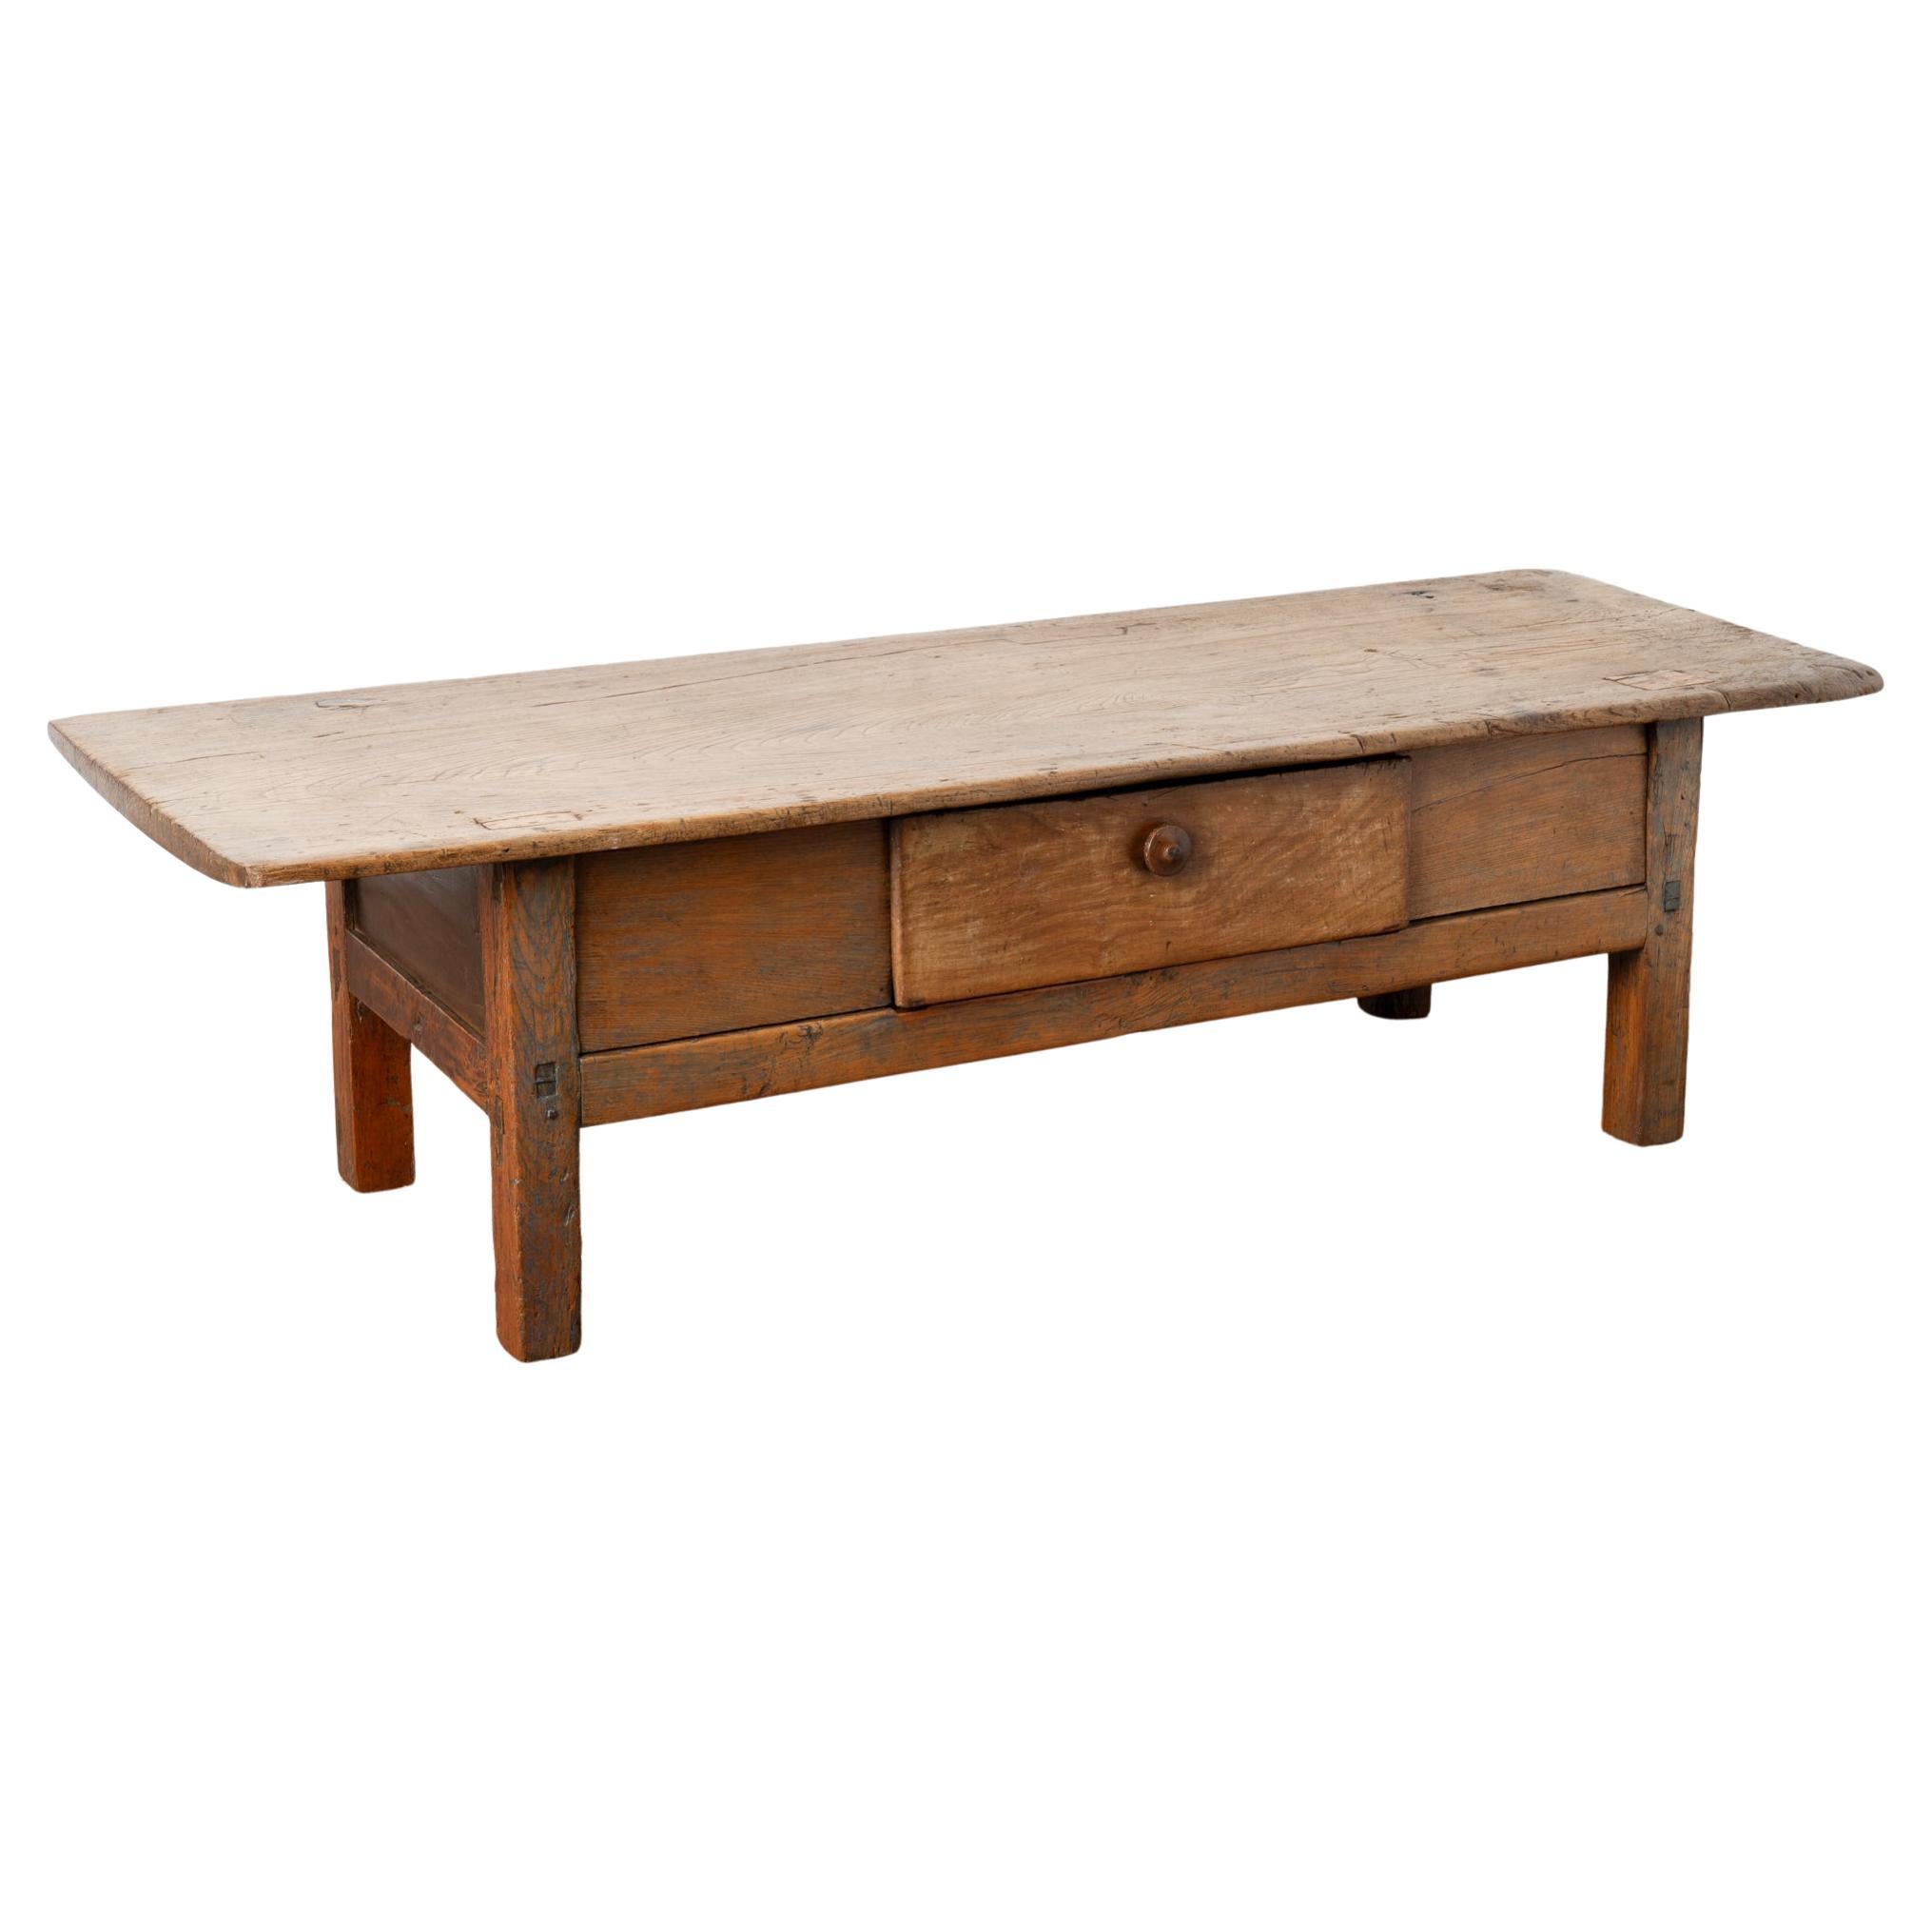 Large French Coffee Table With Single Drawer, circa 1890